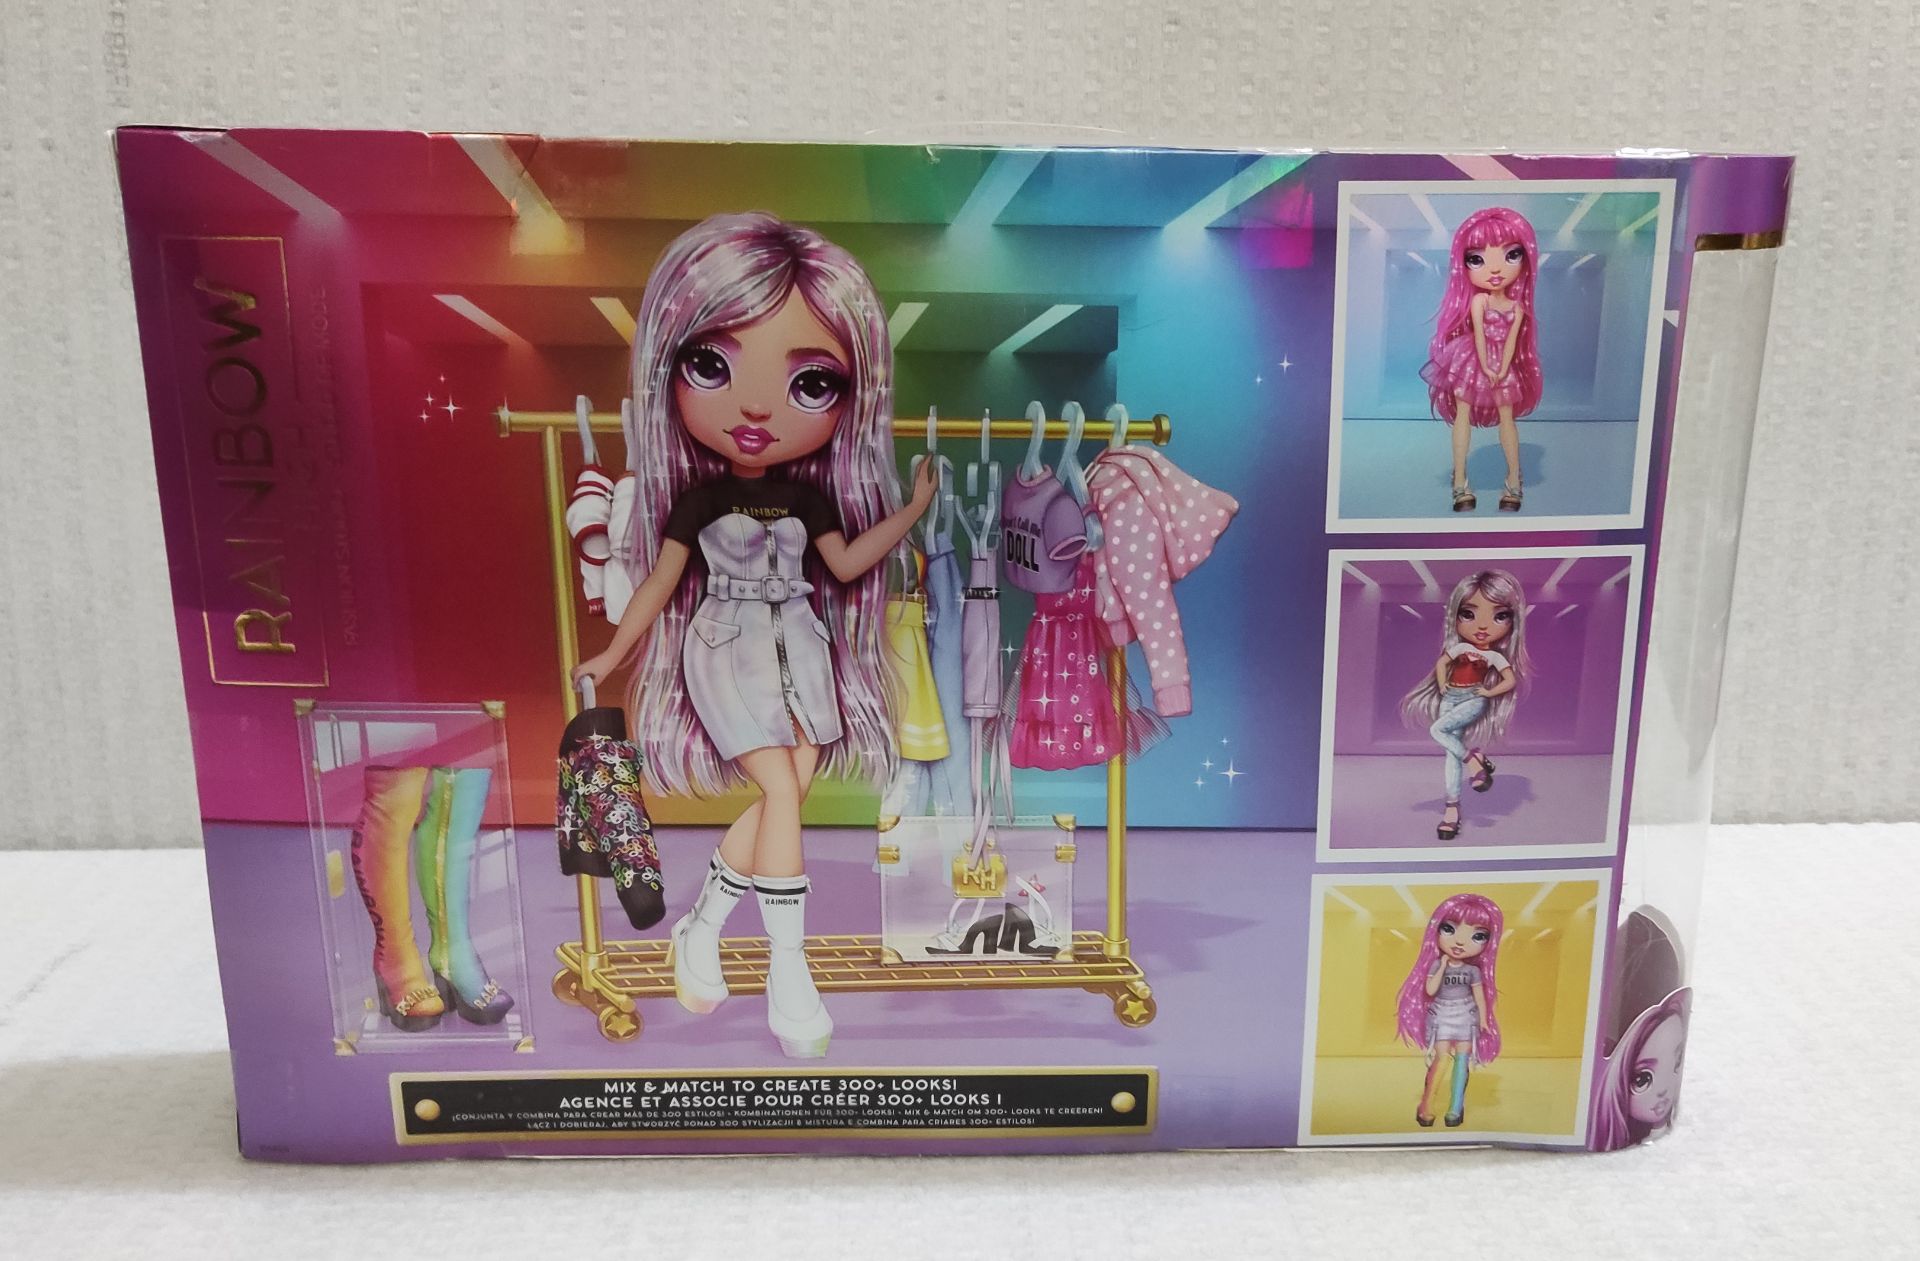 1 x Rainbow High Avery Styles Doll And Fashion Studio - New/Boxed - Image 4 of 4